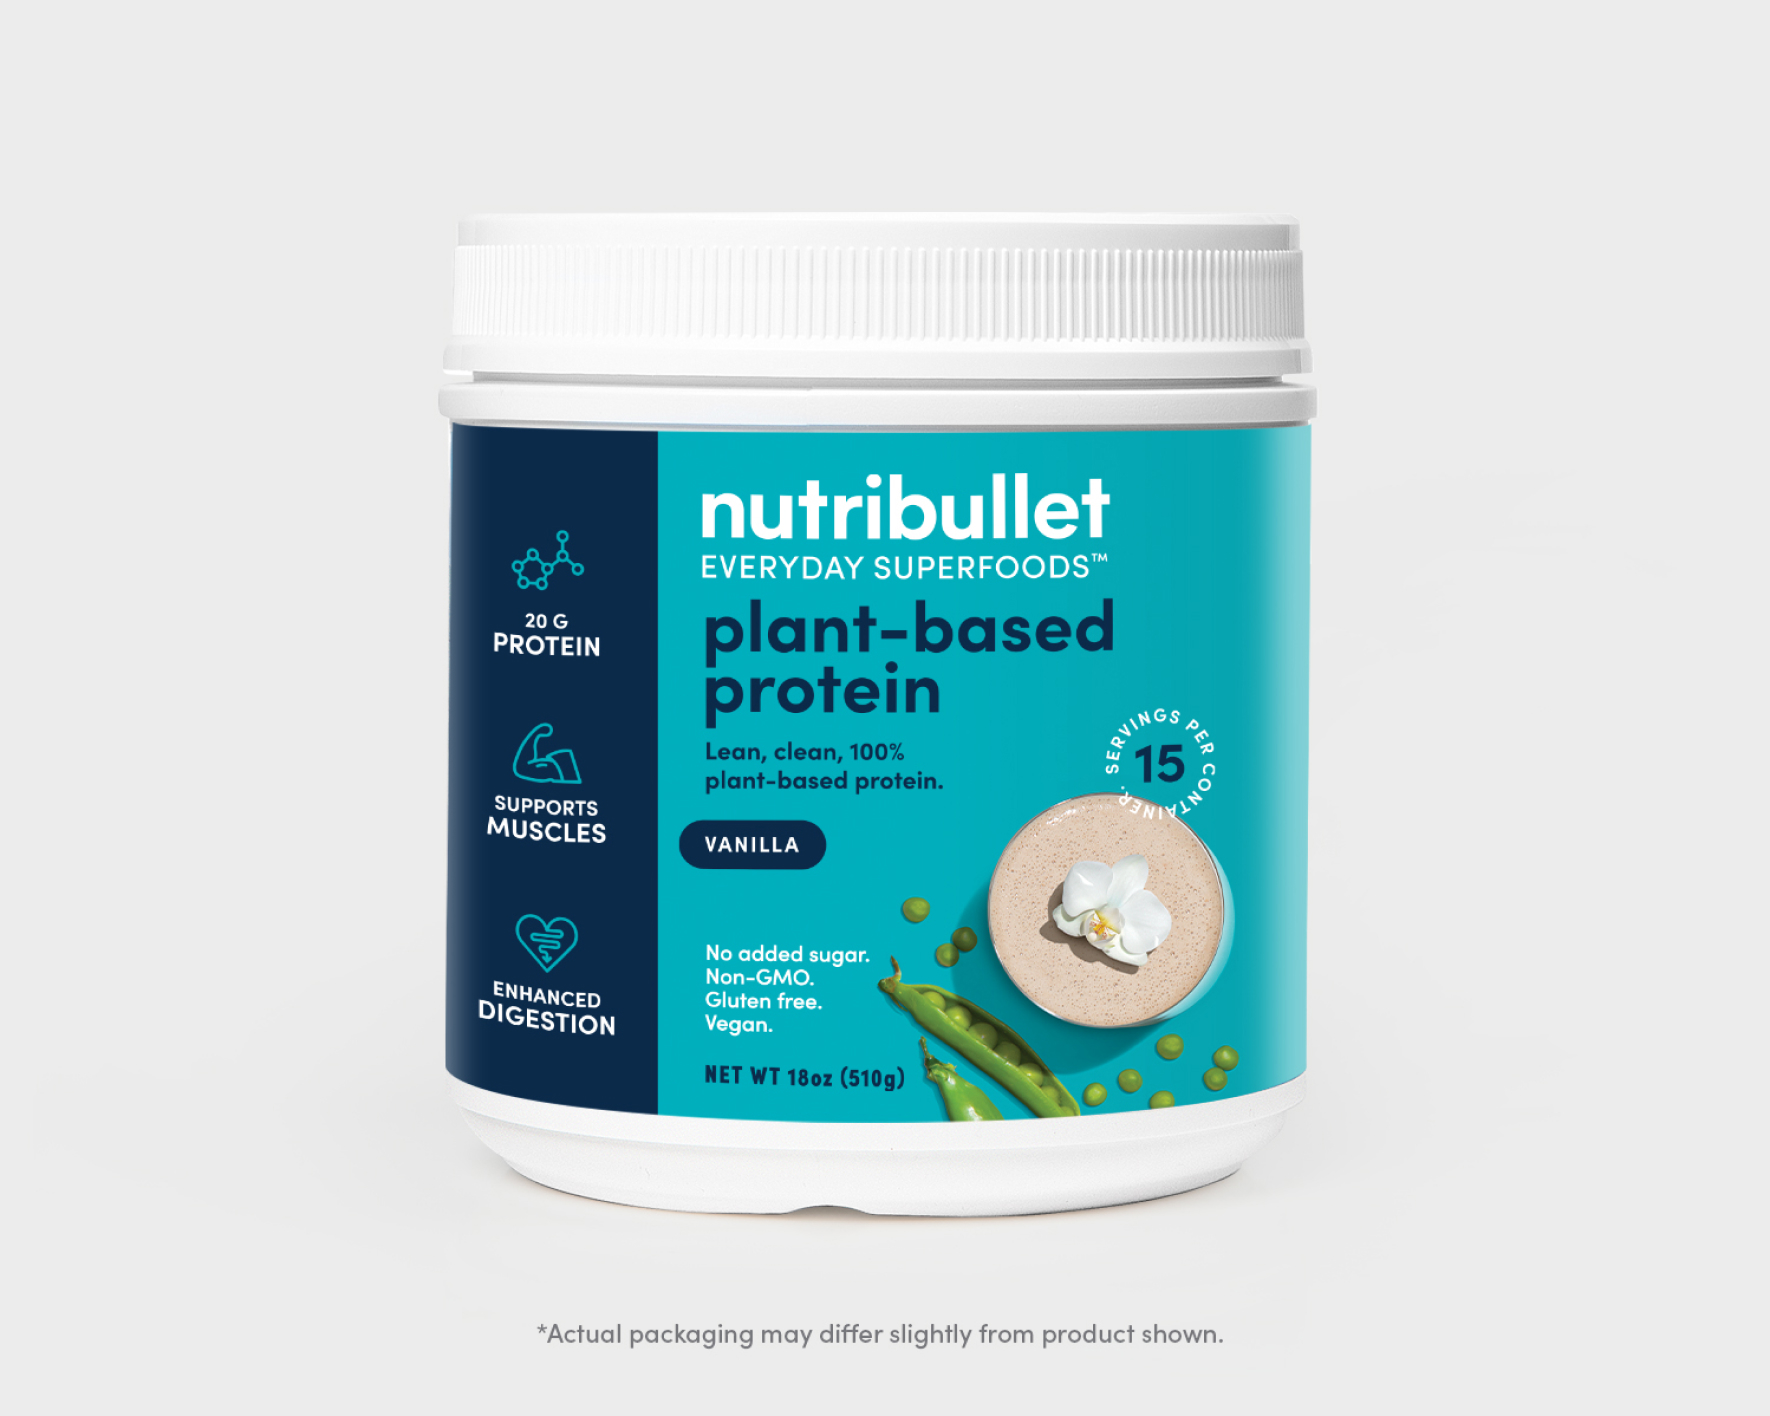 nutribullet Plant Based Protein tub vanilla flavor, 15 servings on blue label with vegetables and smoothies